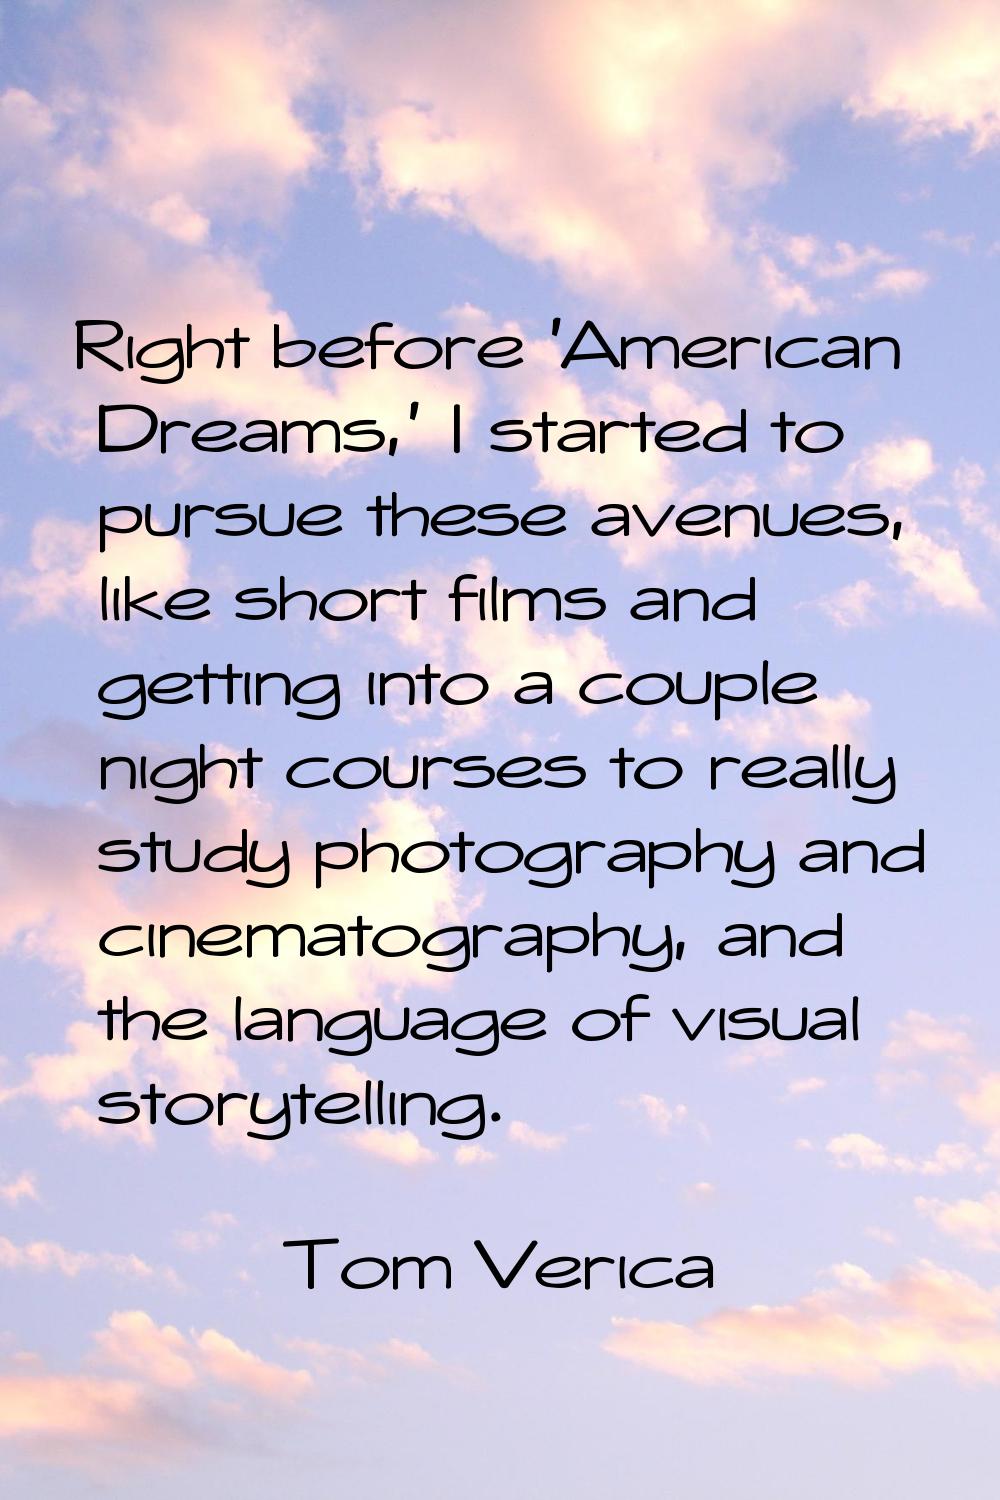 Right before 'American Dreams,' I started to pursue these avenues, like short films and getting int